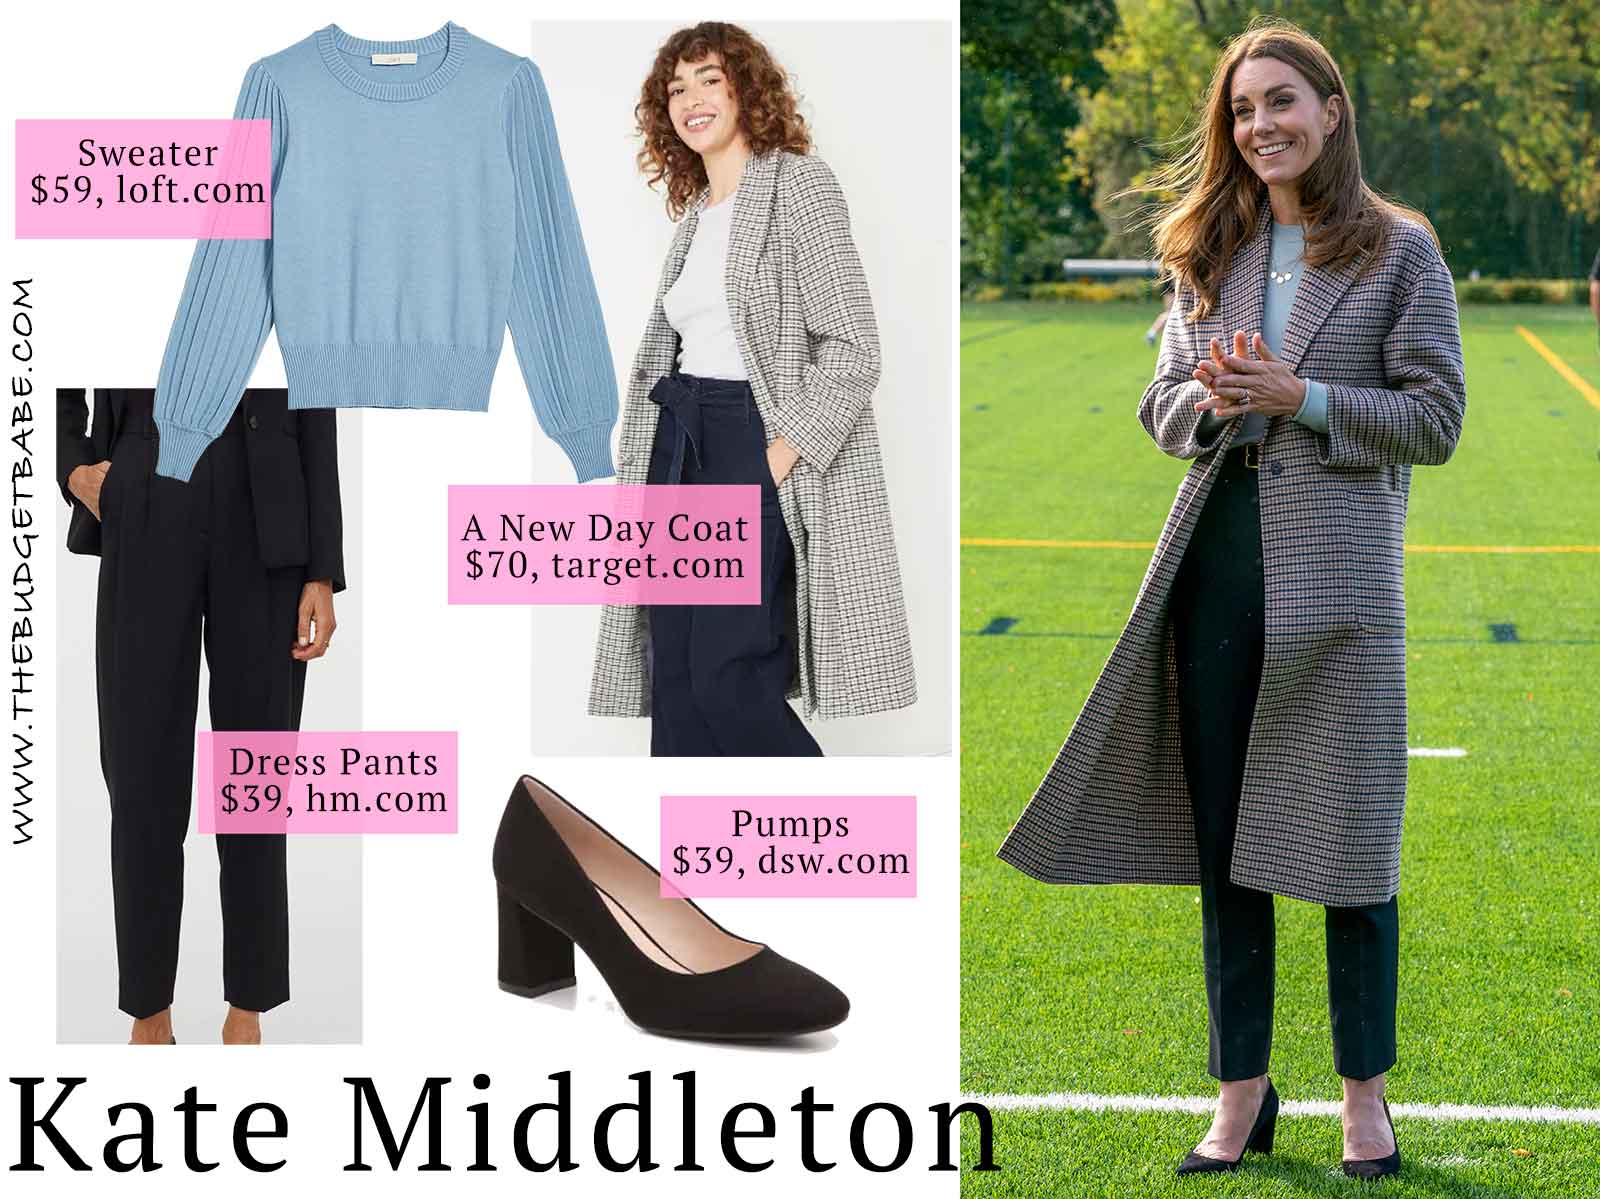 Kate Middleton fashion inspiration, business casual outfit idea for fall